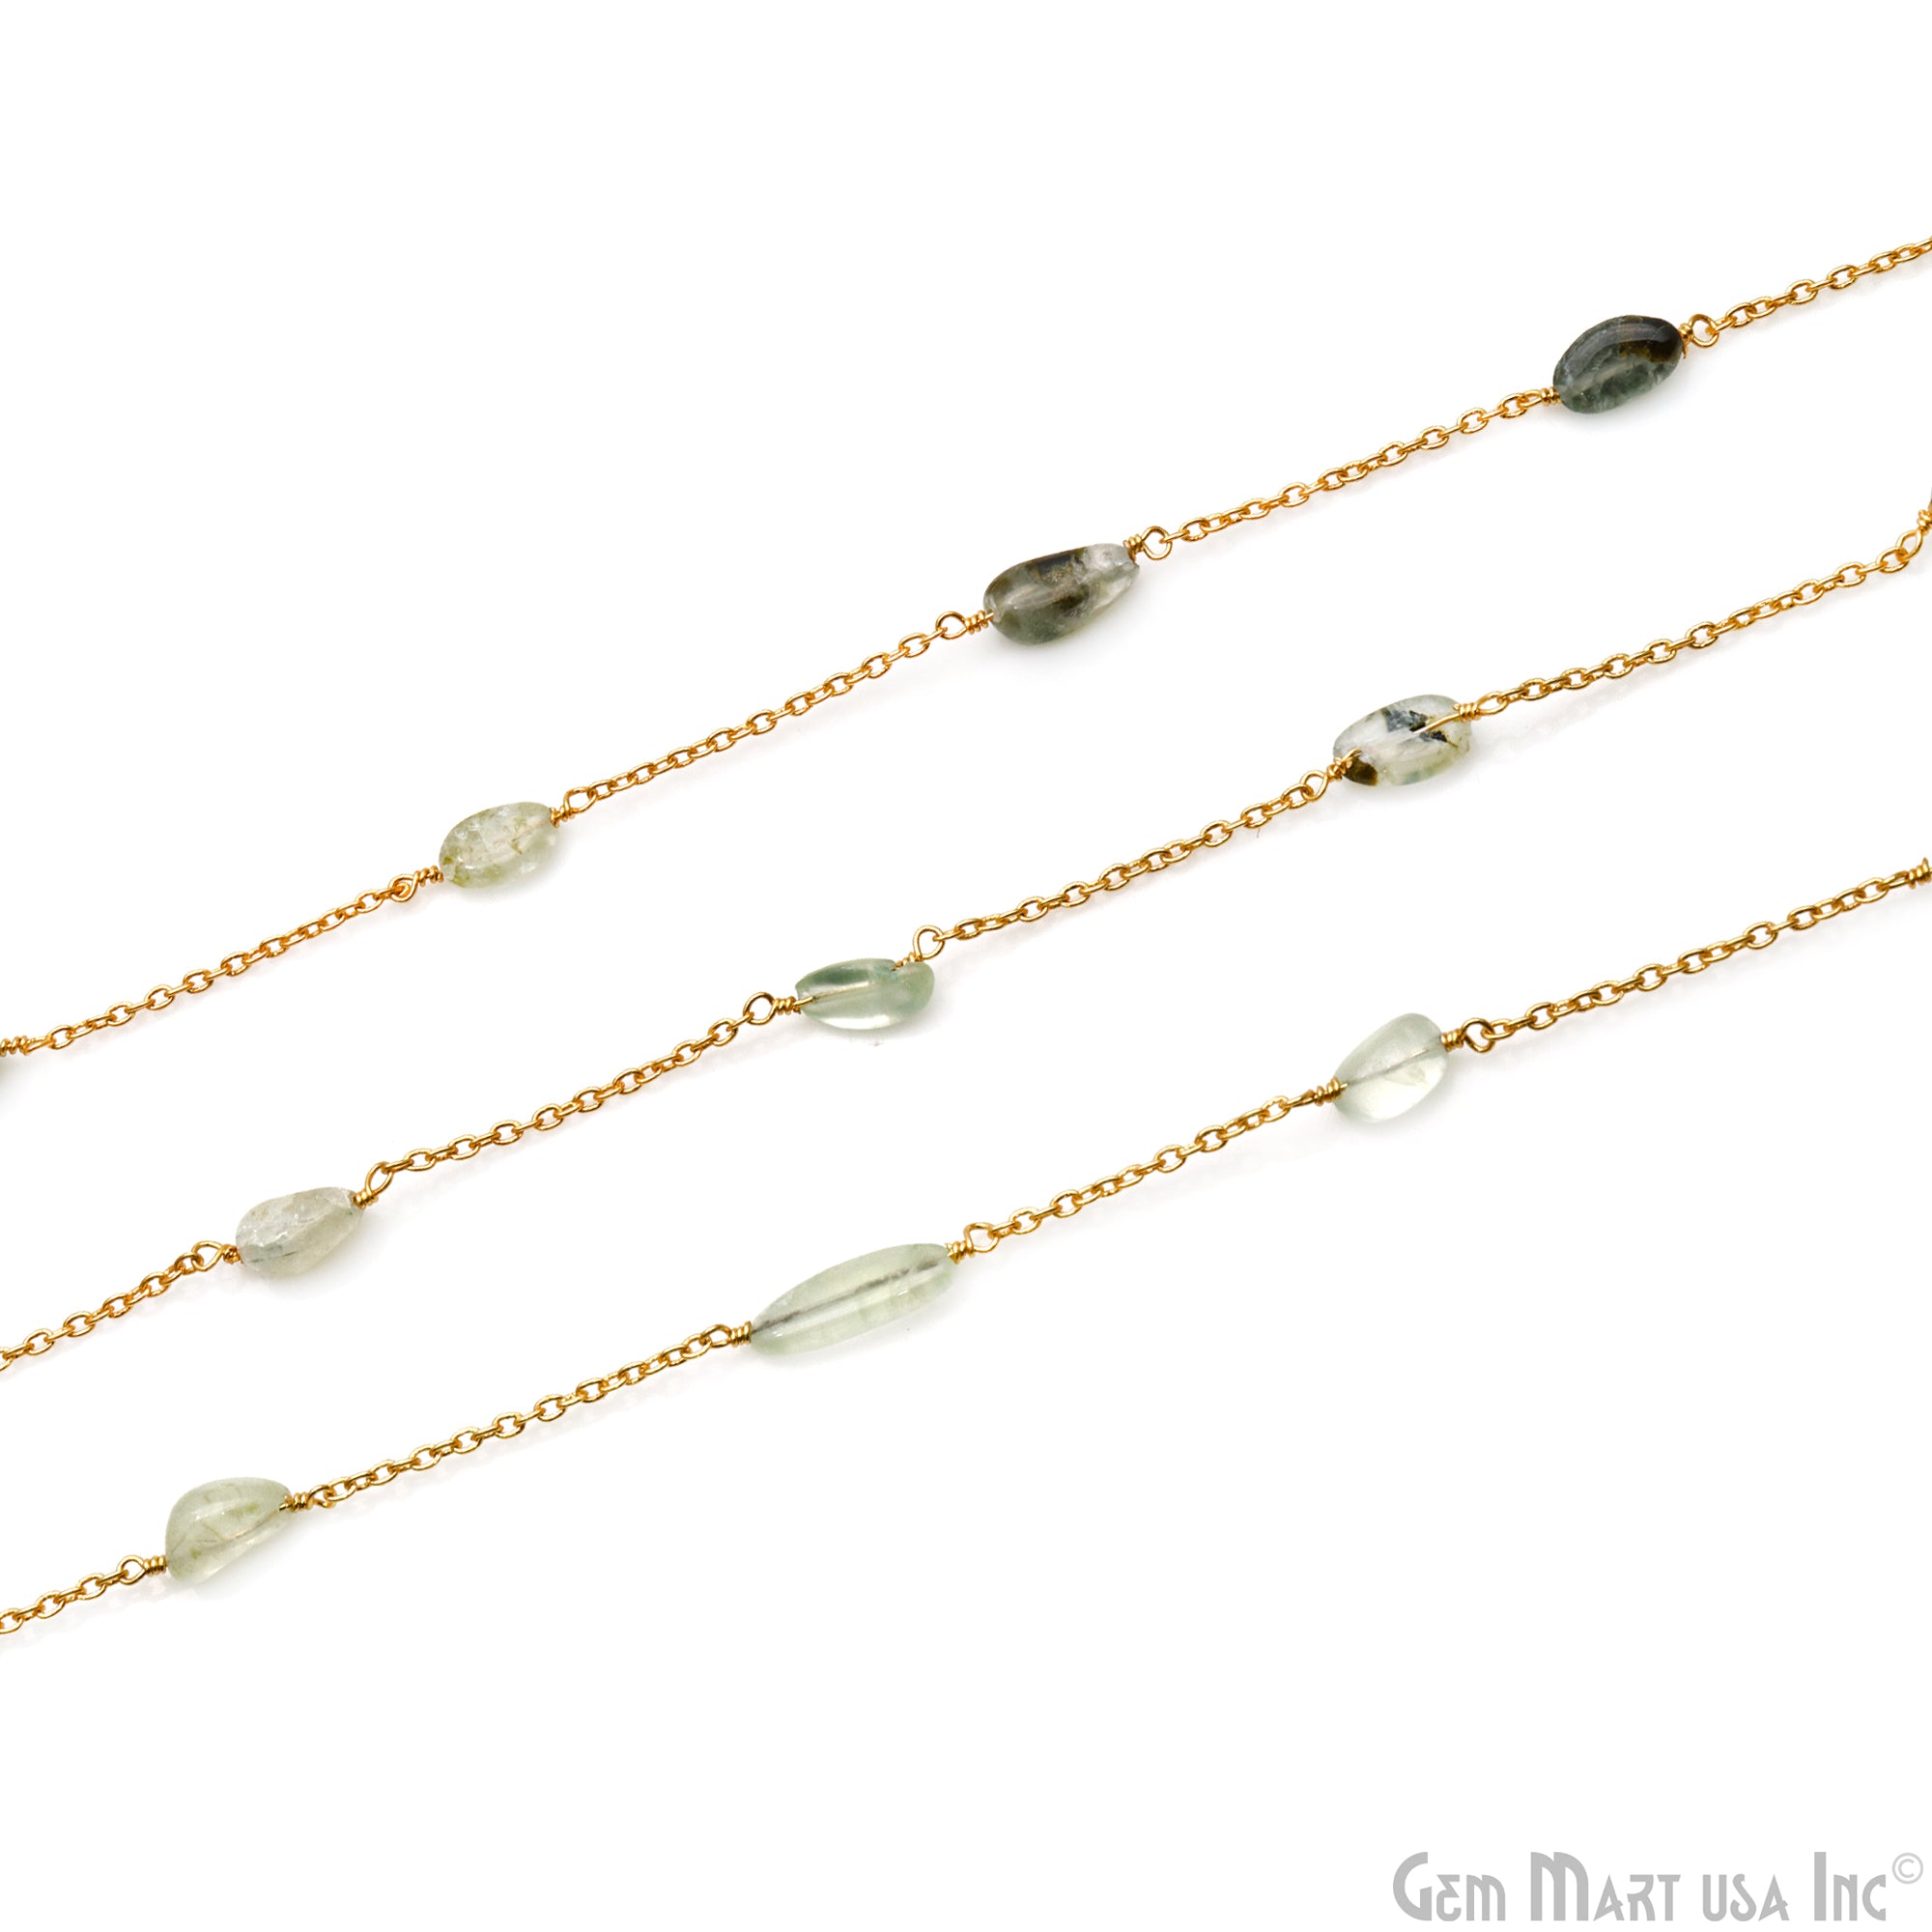 Green Rutile Tumble Beads 10x6mm Gold Wire Wrapped Rosary Chain